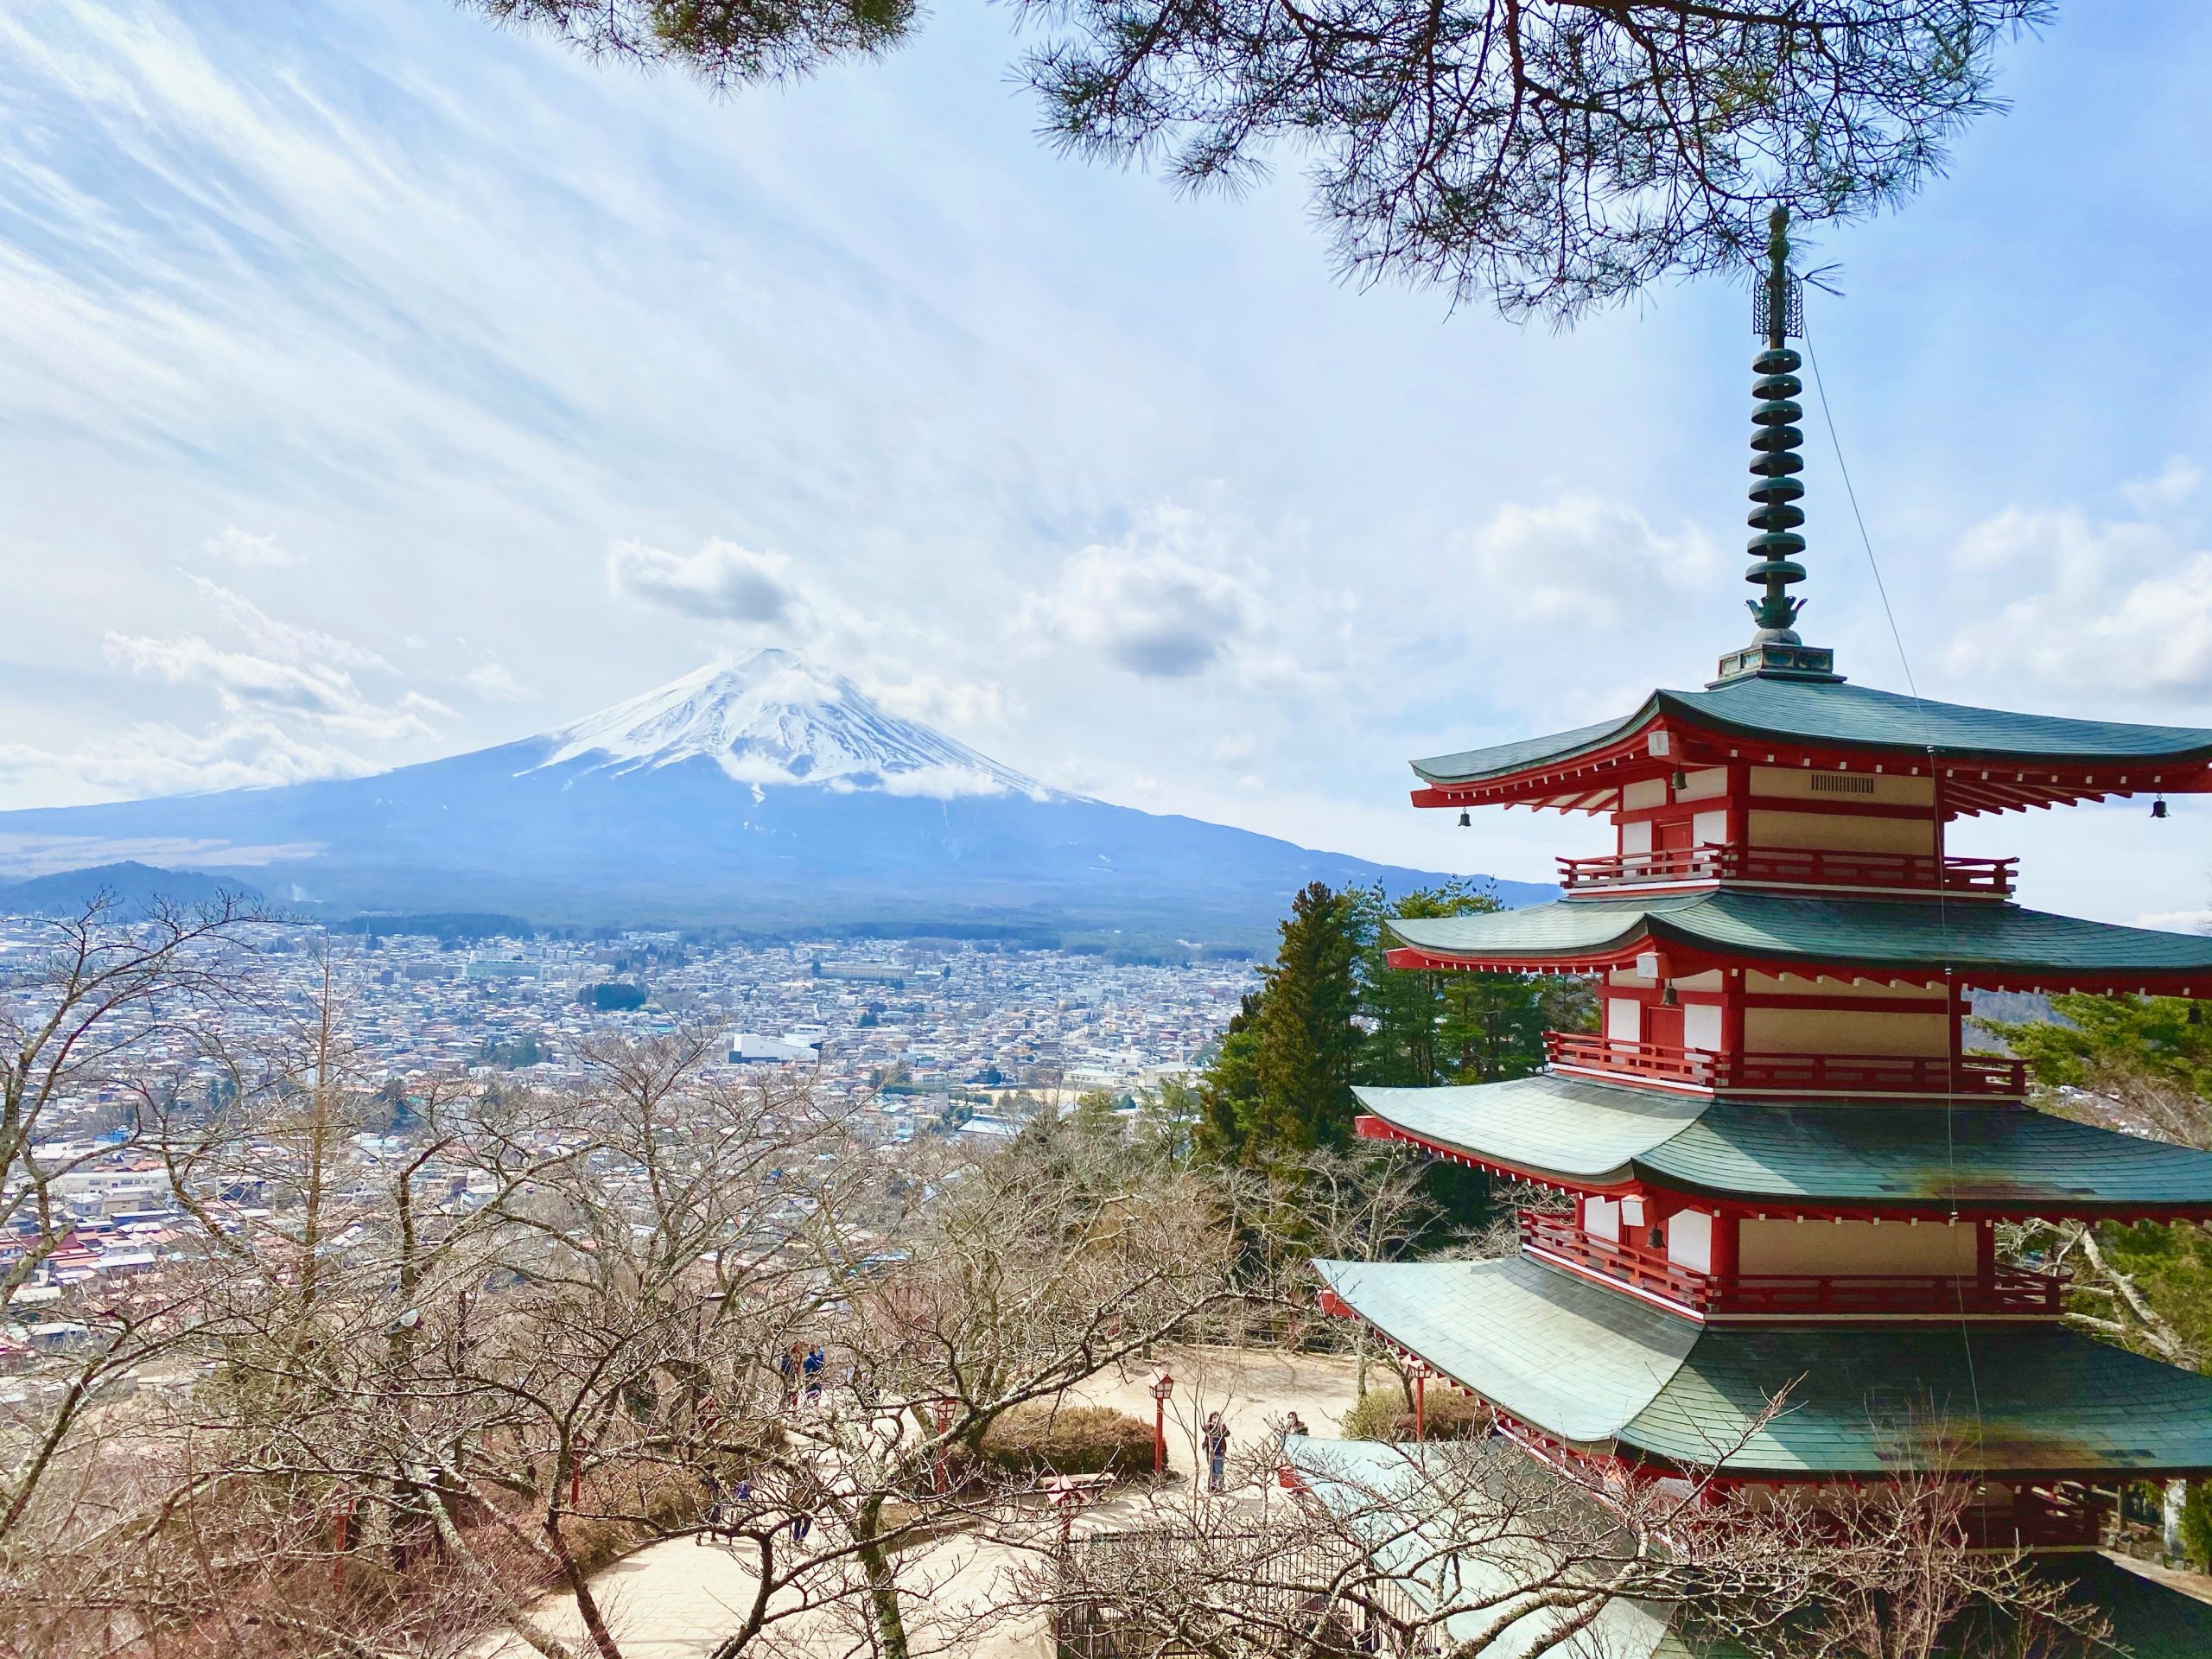 A beautiful sunny day with a red/green temple and Mt. Fuji in full view